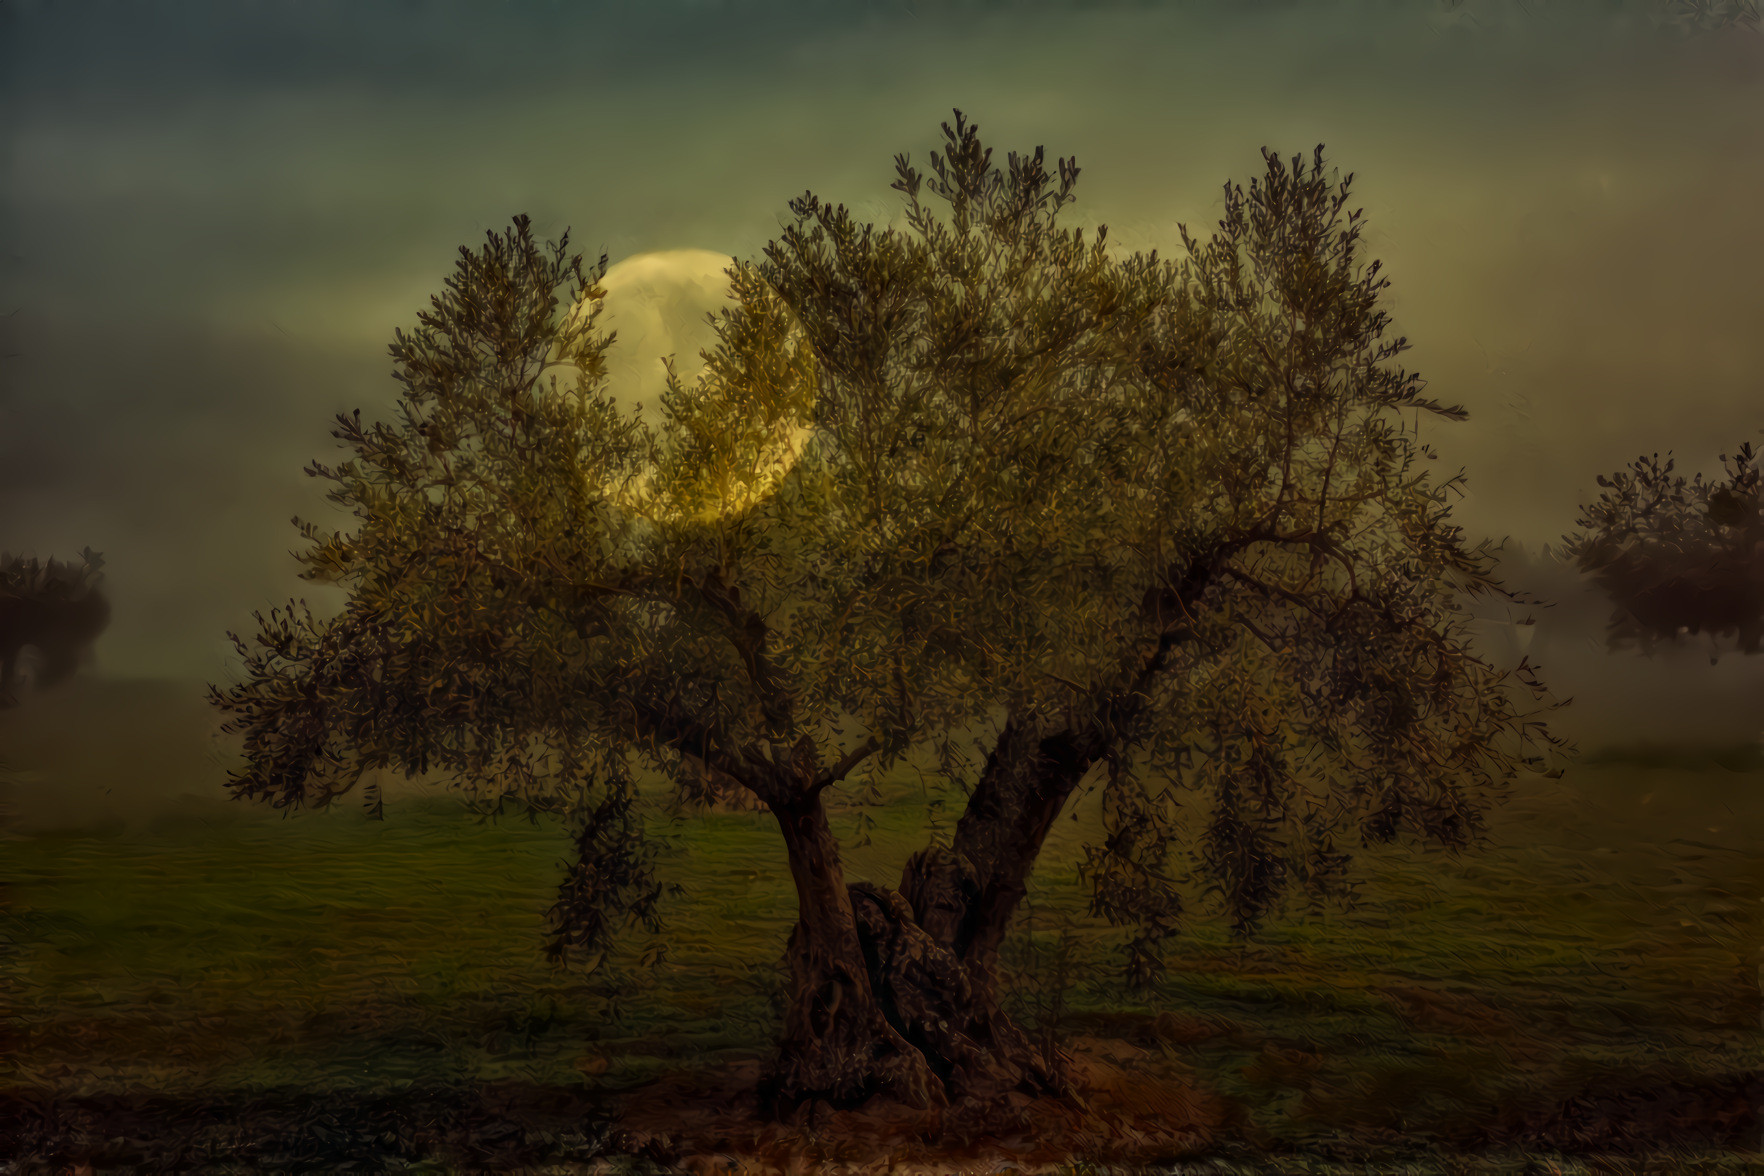 Moon Behind the Olive Tree